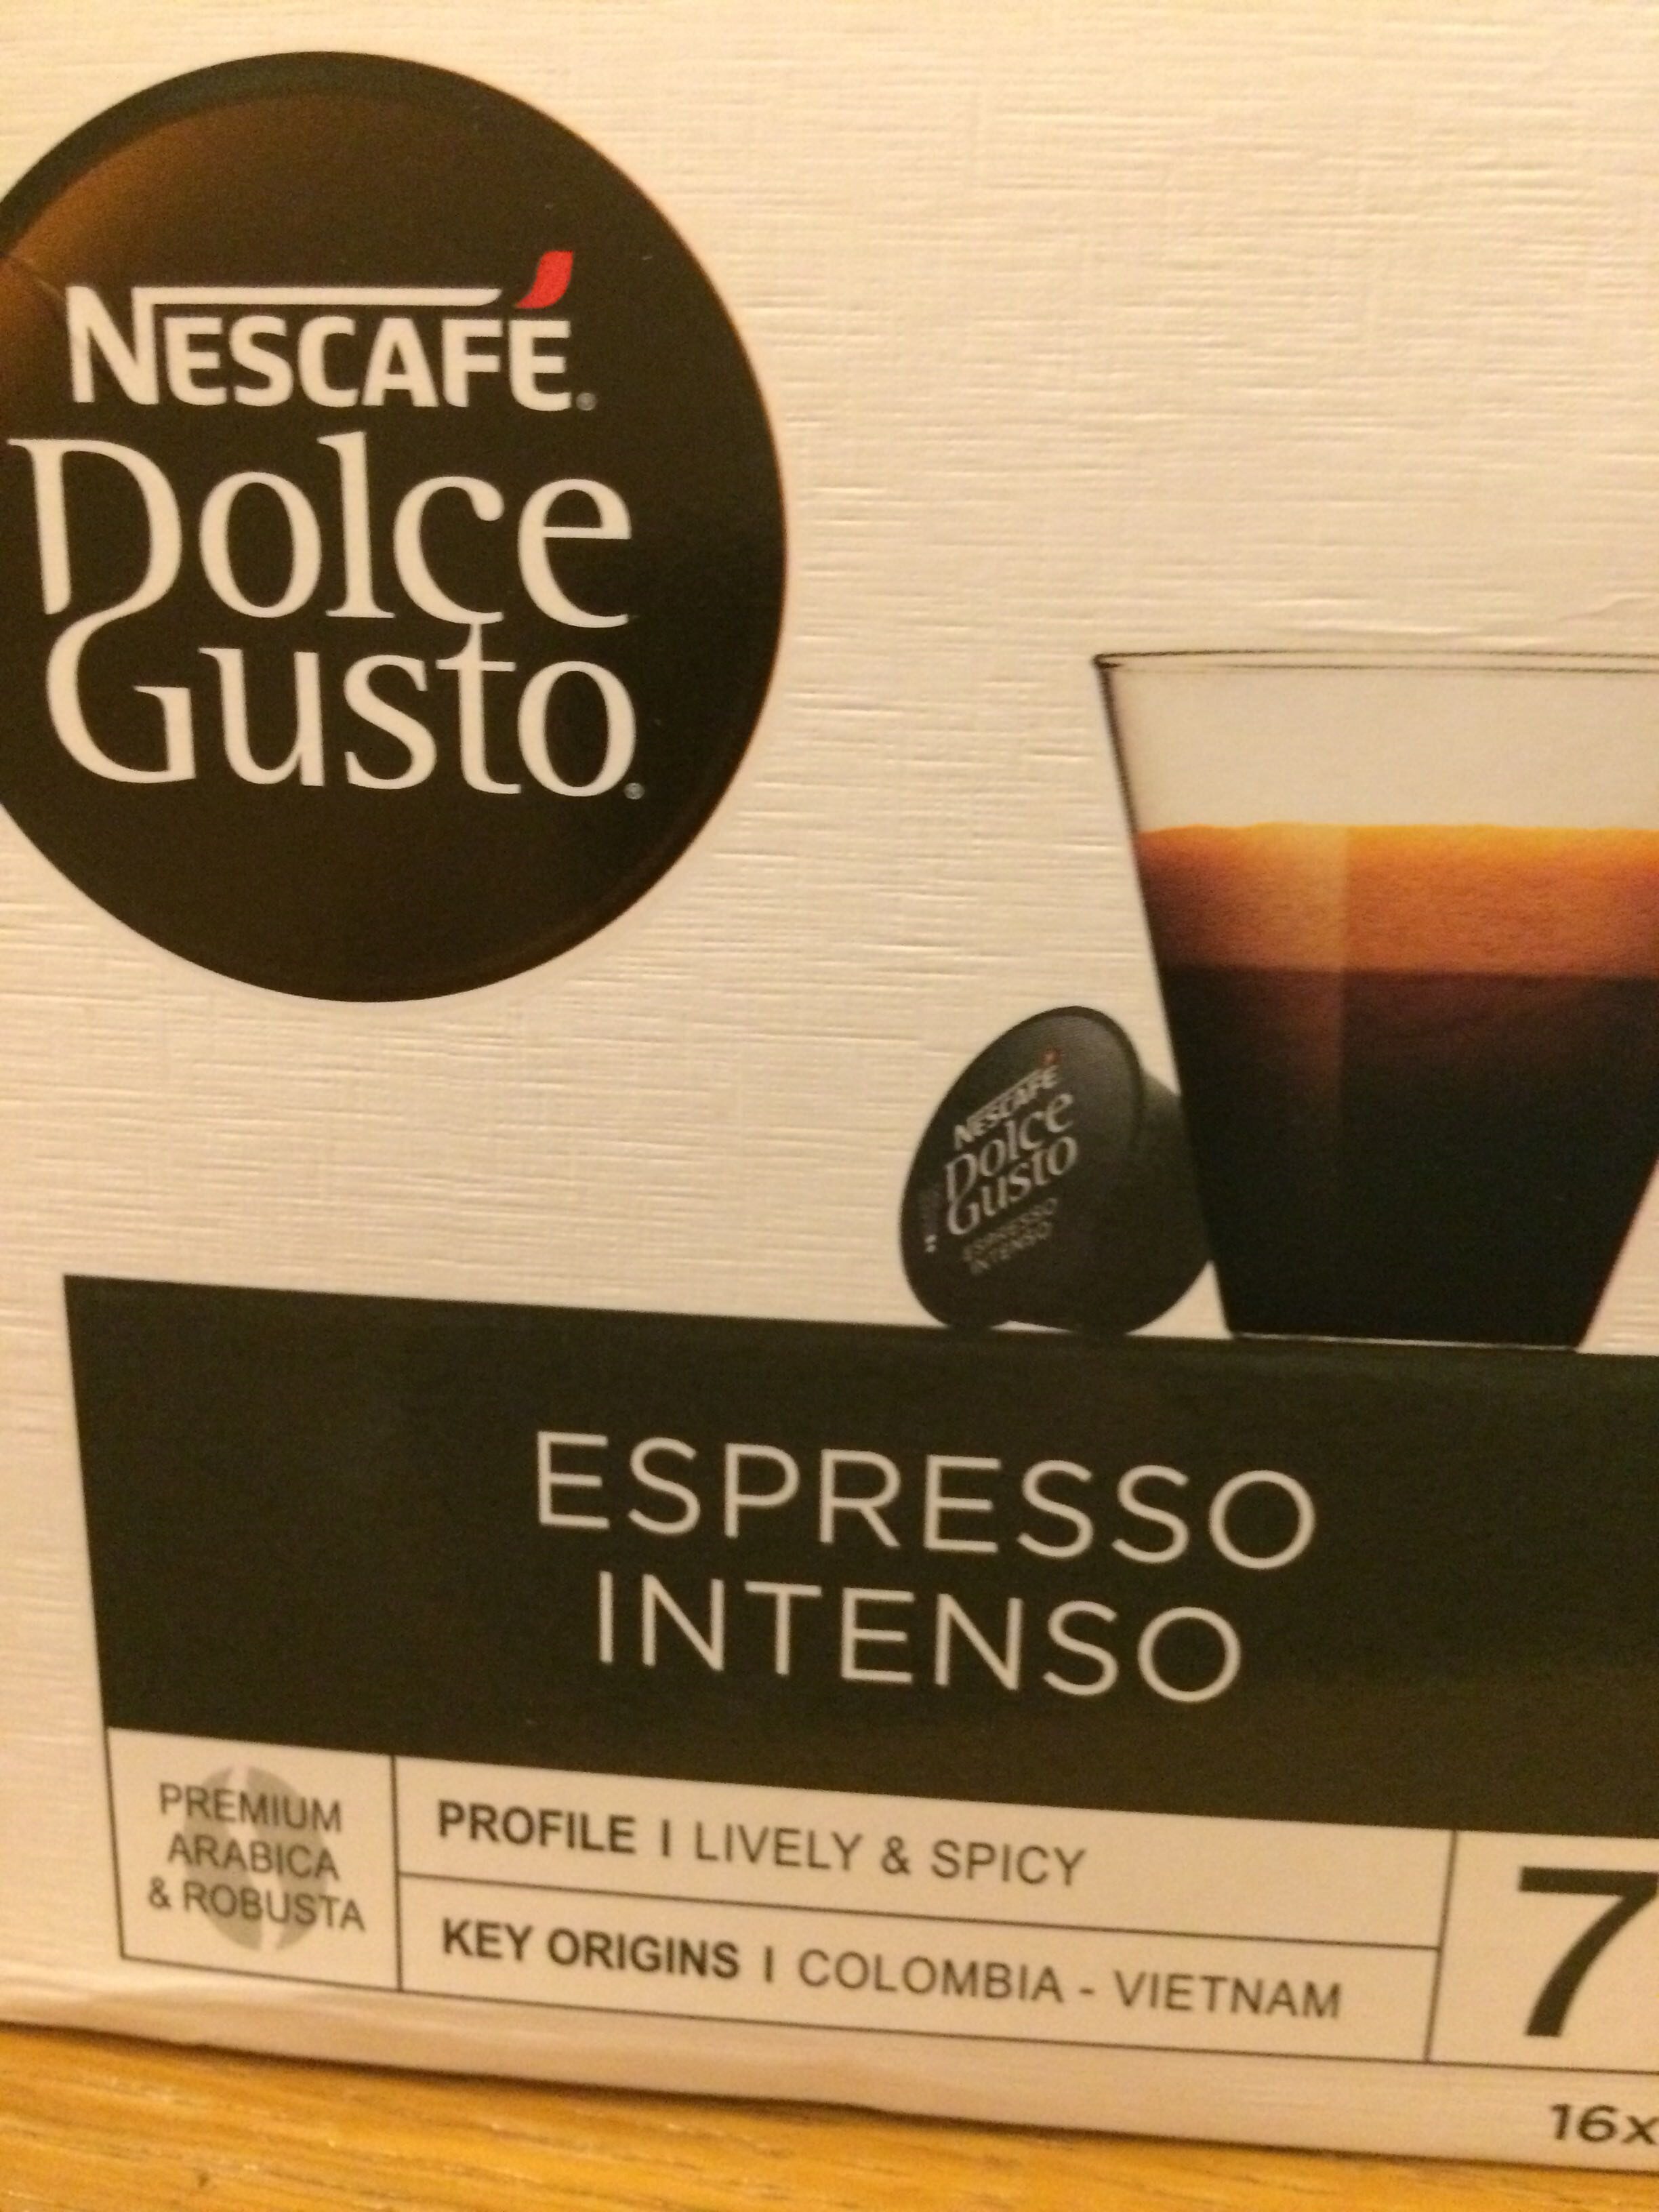 Dolce Gusto espresso intenso - Product - es